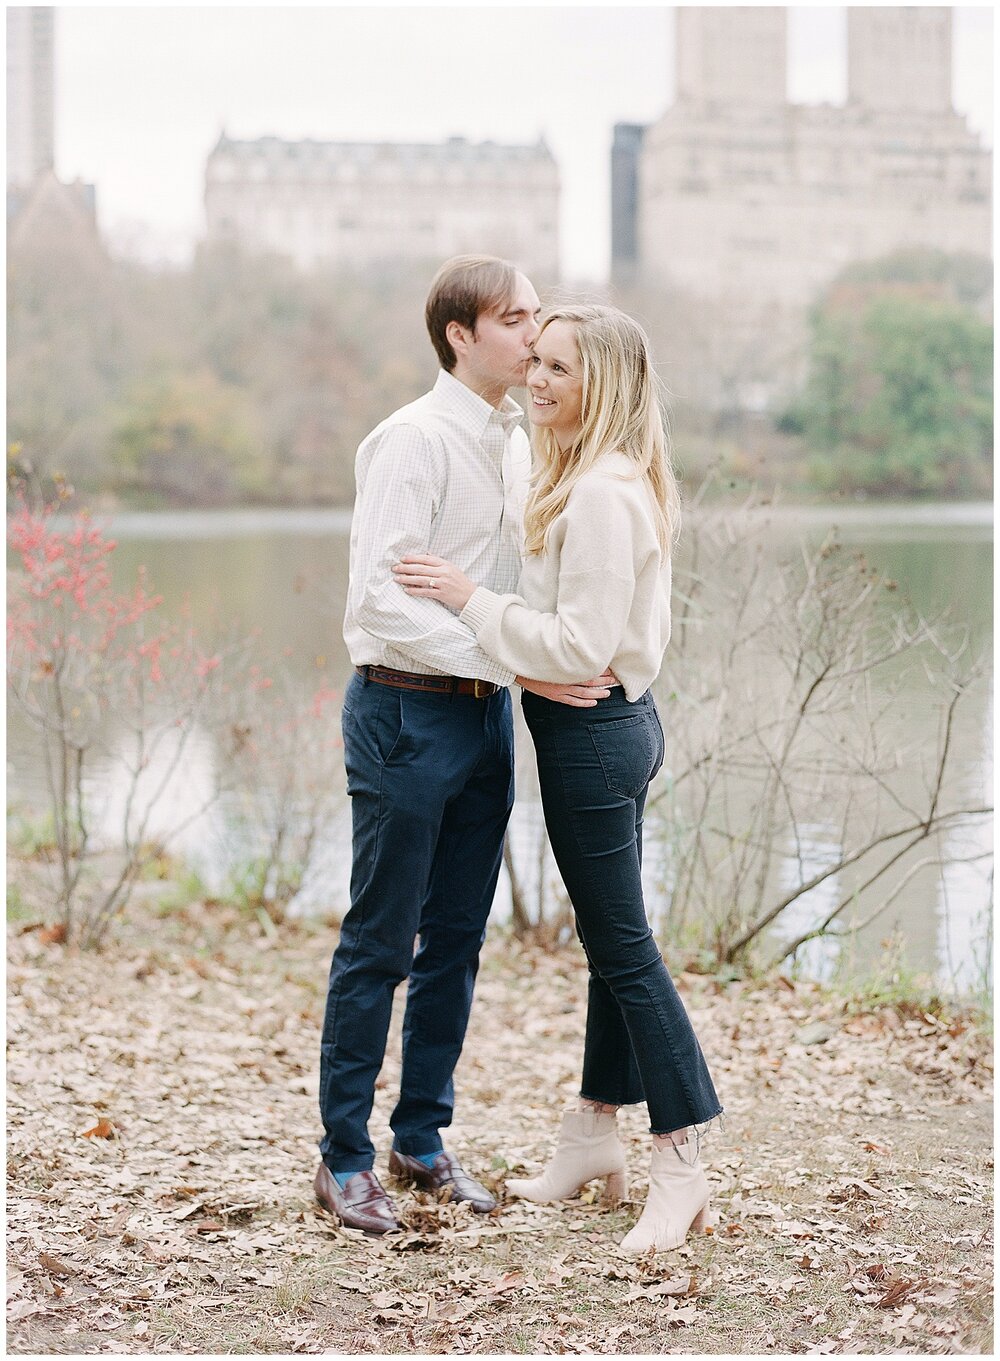  engagement photos in central park new york, engagement photos outfits ideas 